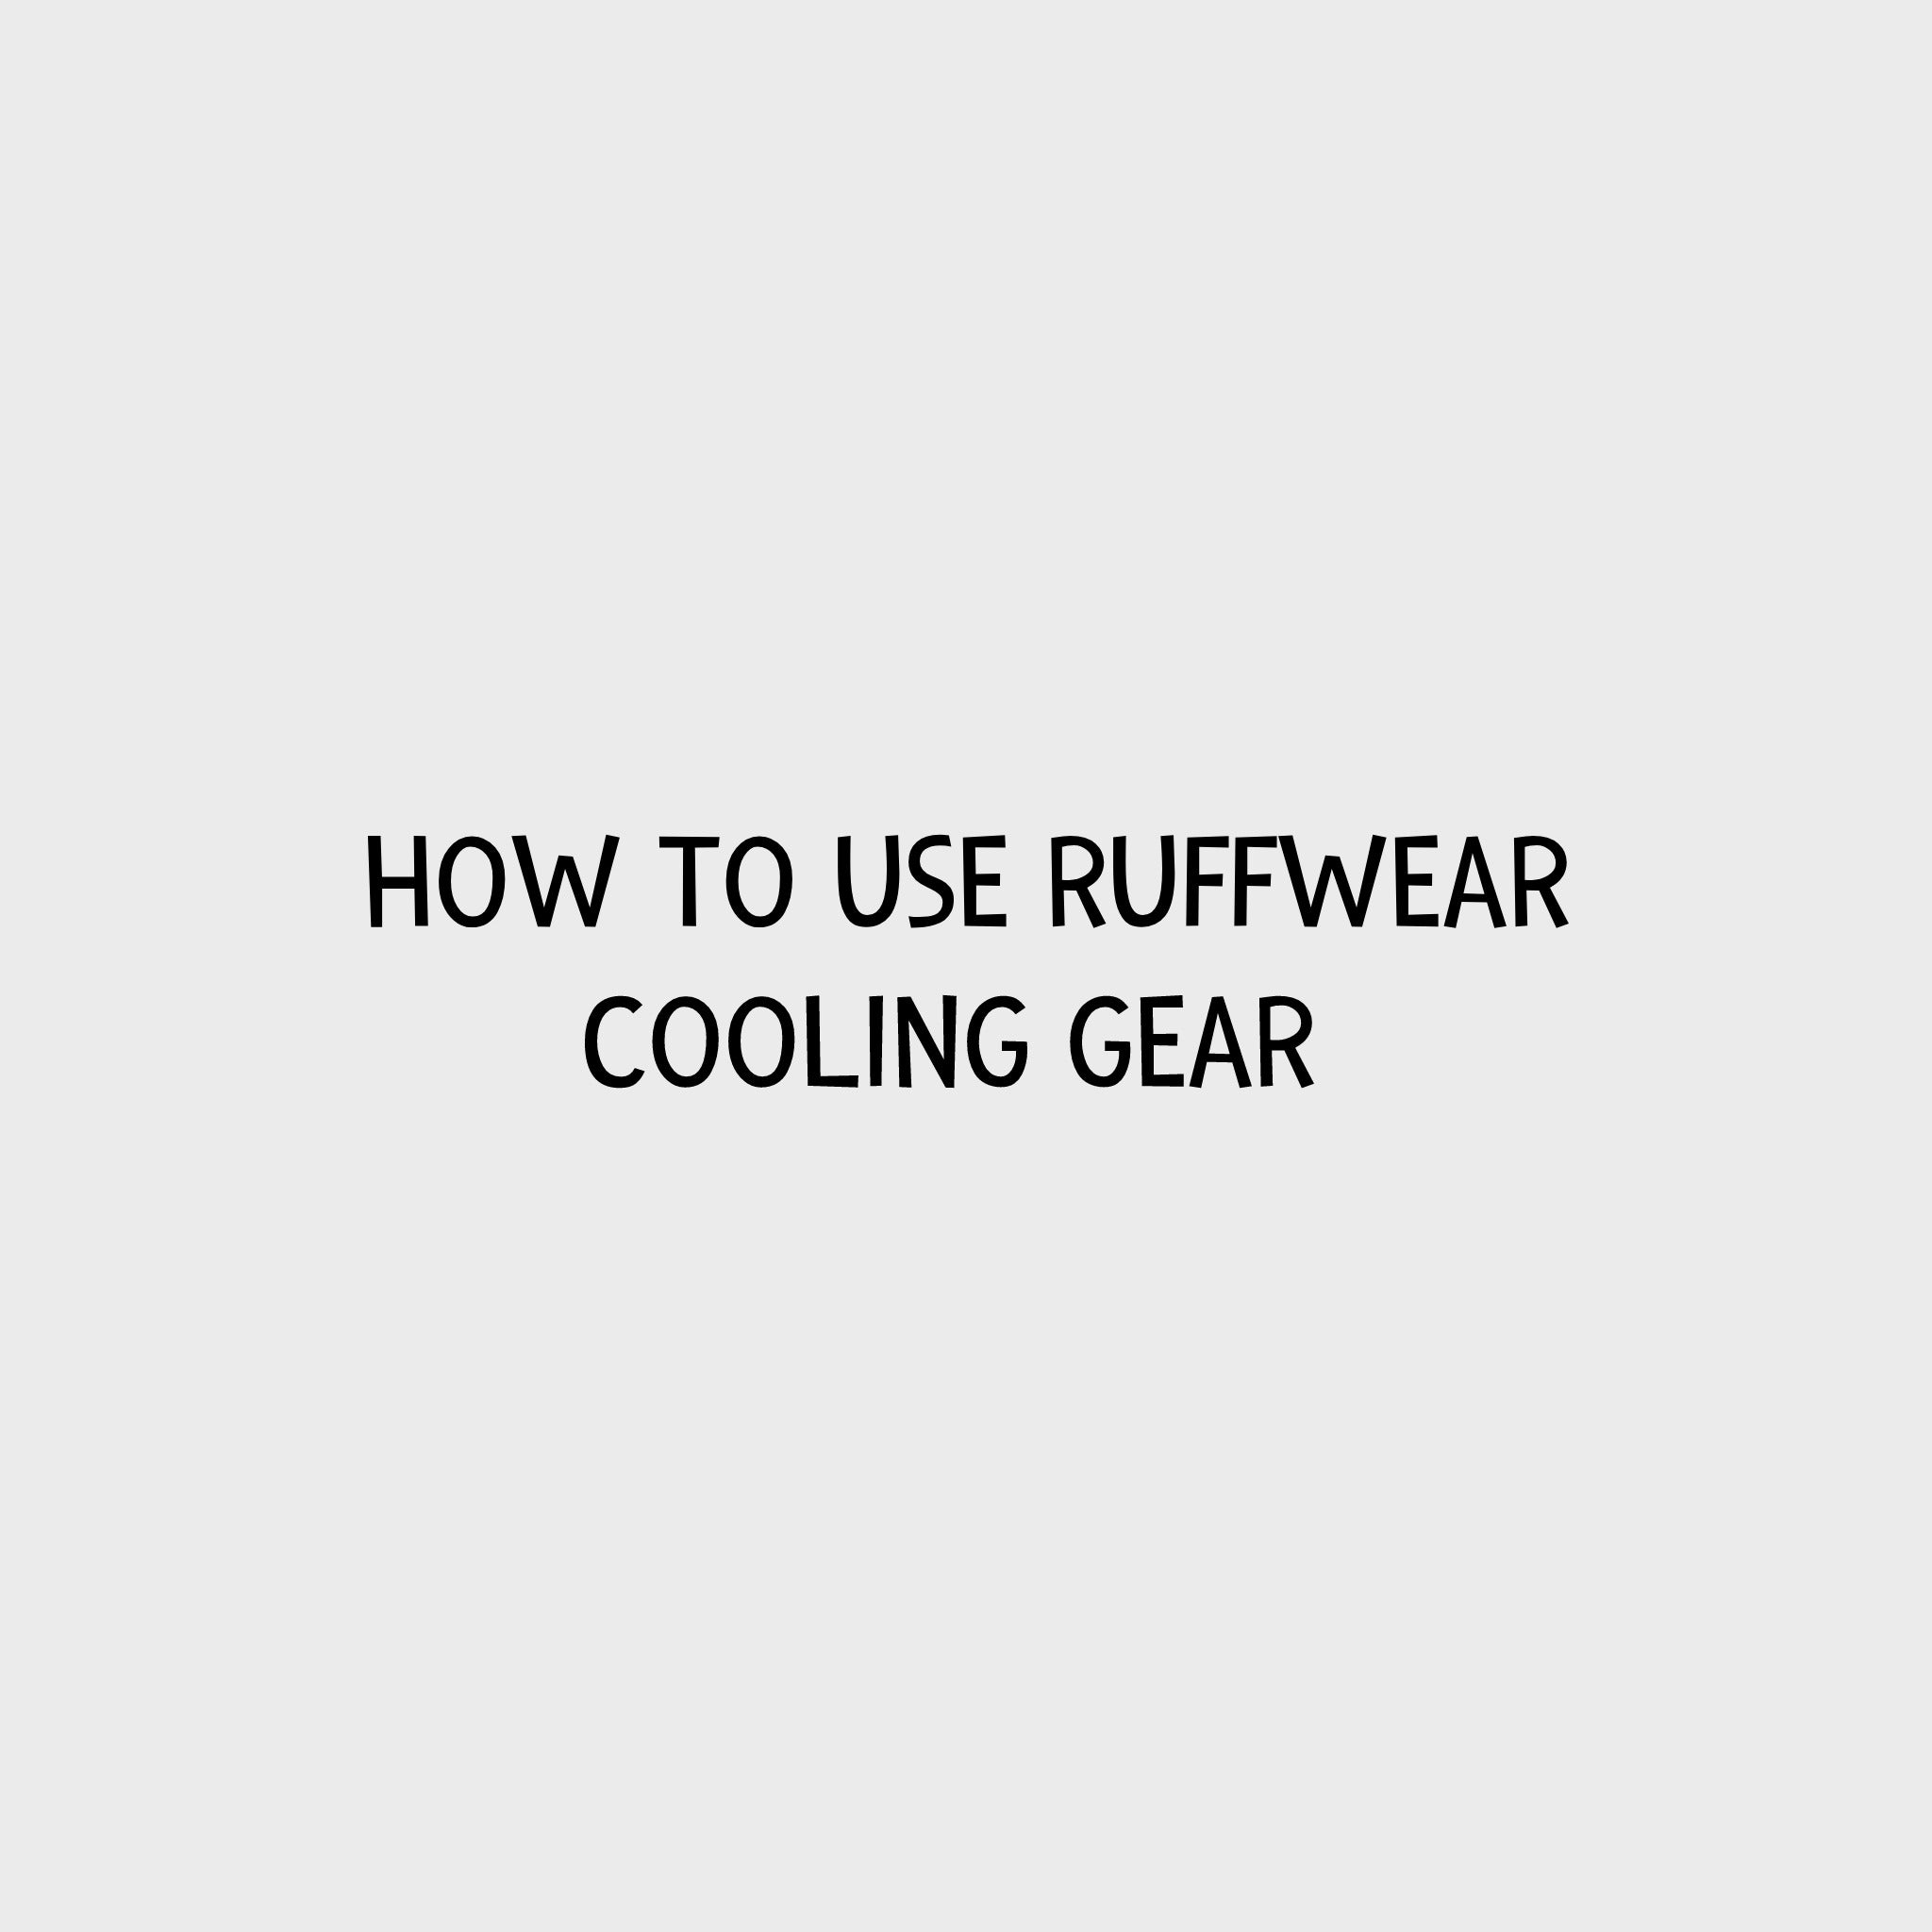 Video - How to use Ruffwear Cooling Gear